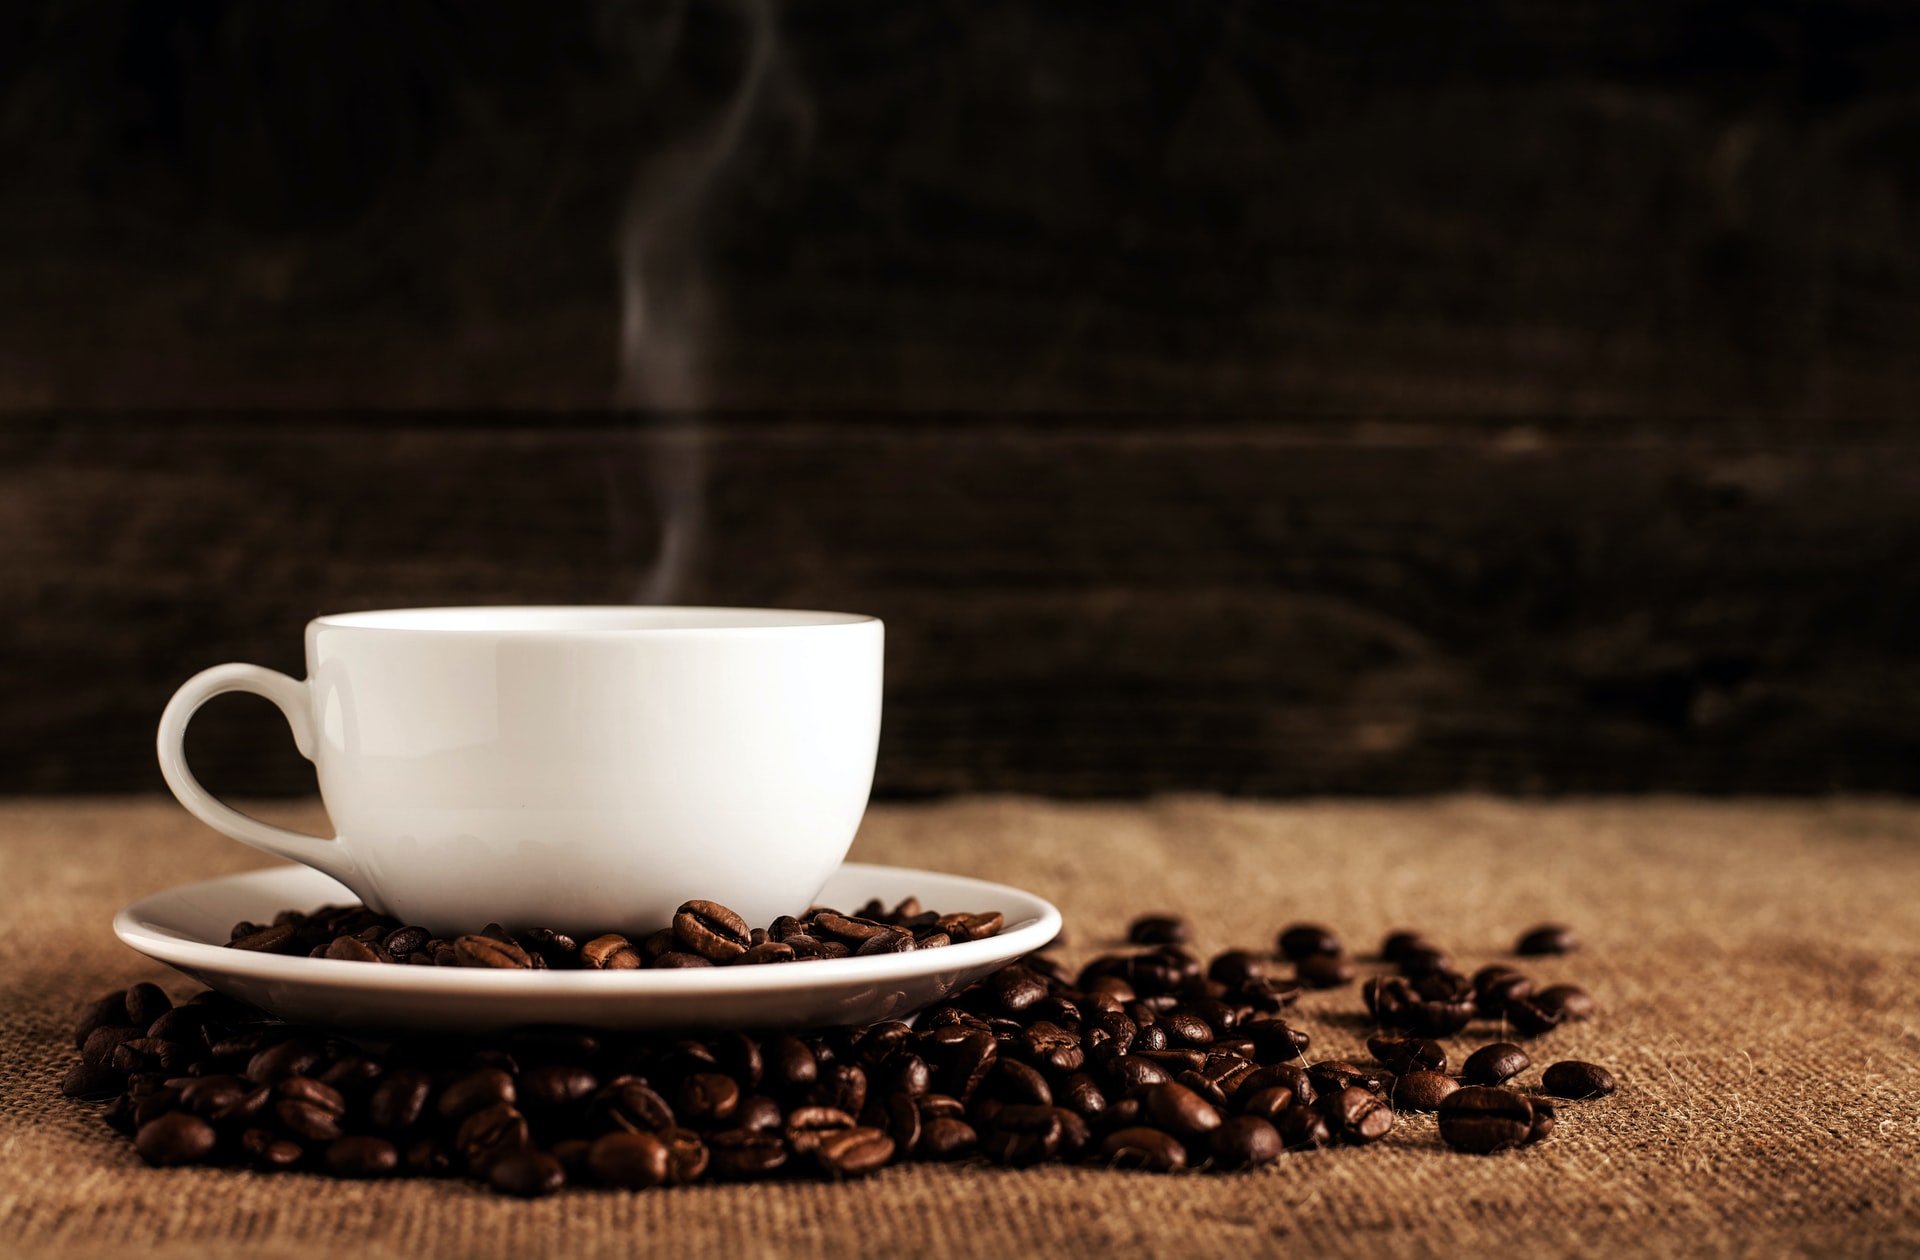 Should you limit your caffeine intake?